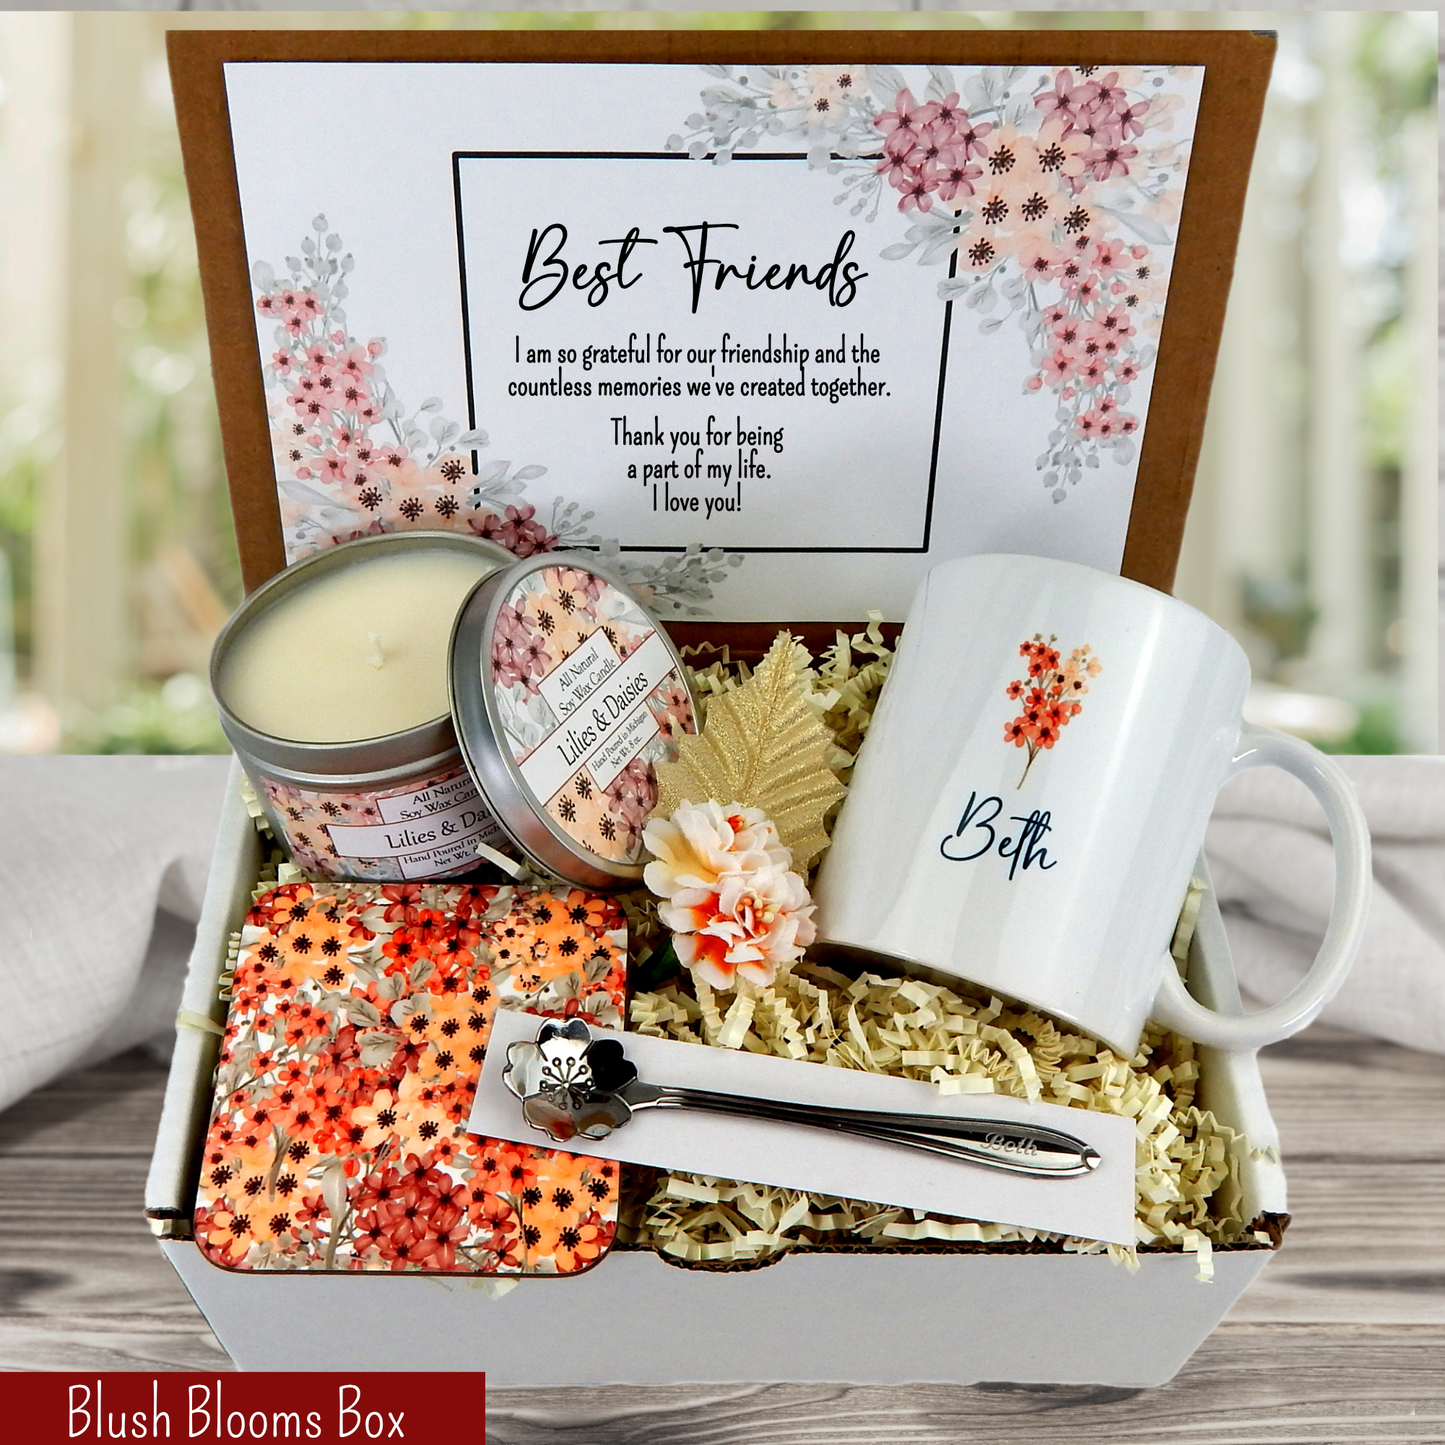 Soul Sister Surprise: Custom Mug, Spoon, and Candle in a Gift Box